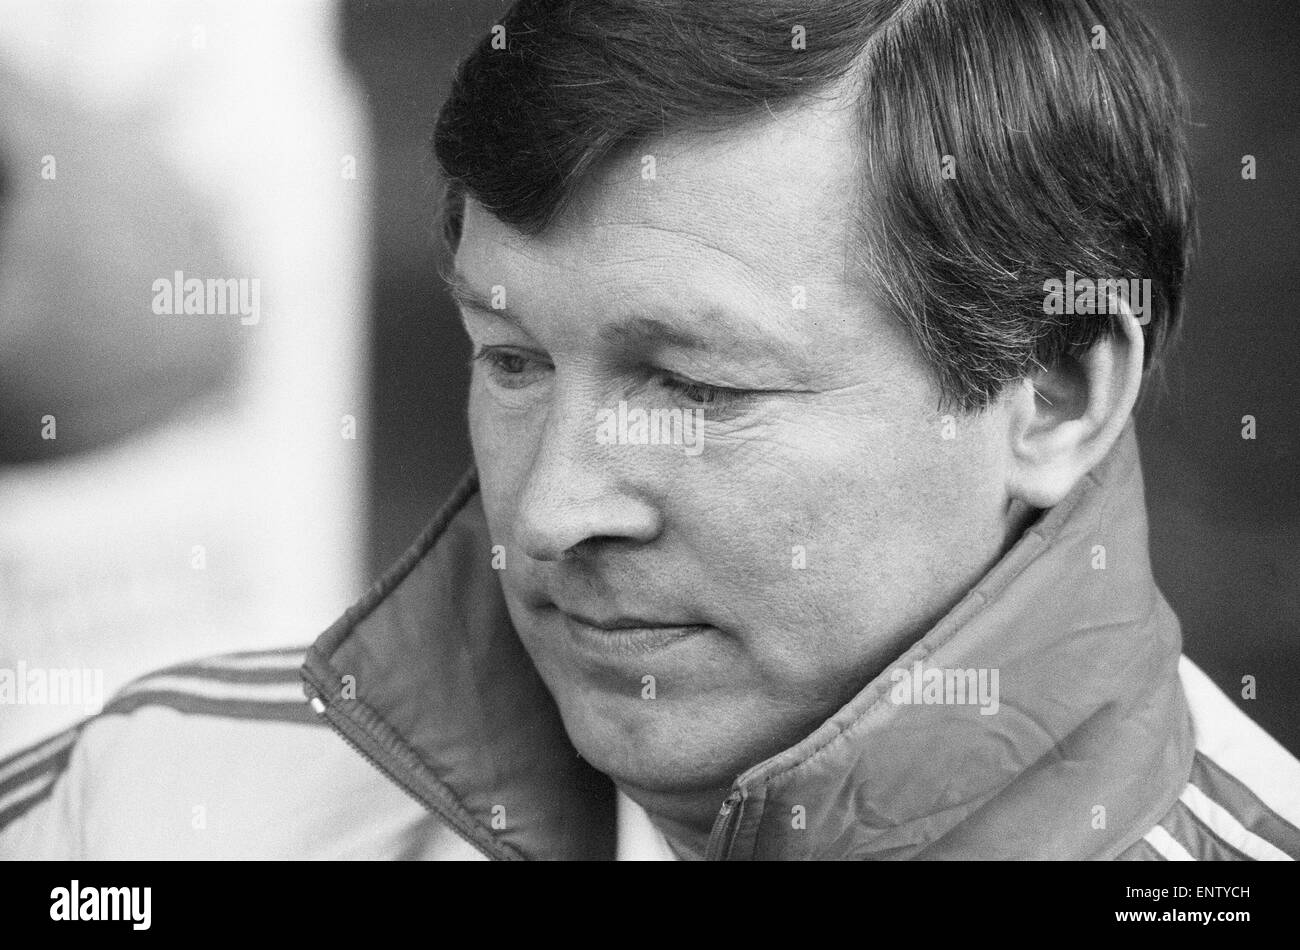 Manchester United manager Alex Ferguson pictured during his side's 2-0 win against Nottingham Forest in the League Division One match at Old Trafford. 28th March 1987. Stock Photo